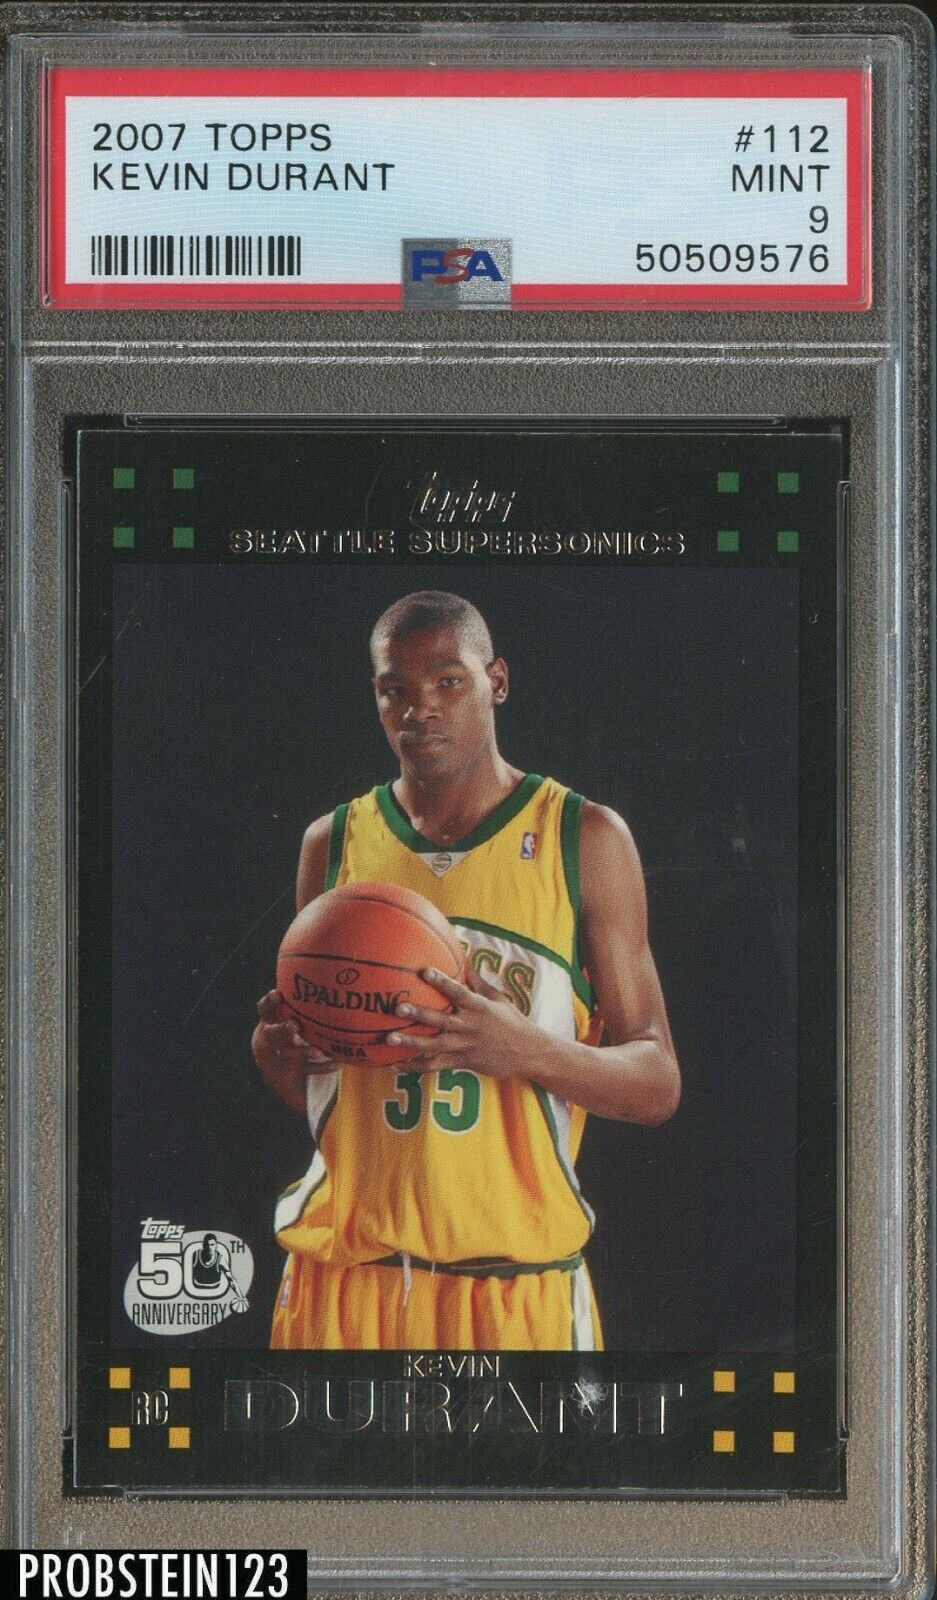 2007-08 Topps #112 Kevin Durant Seattle Supersonics RC Rookie PSA 9 MINT